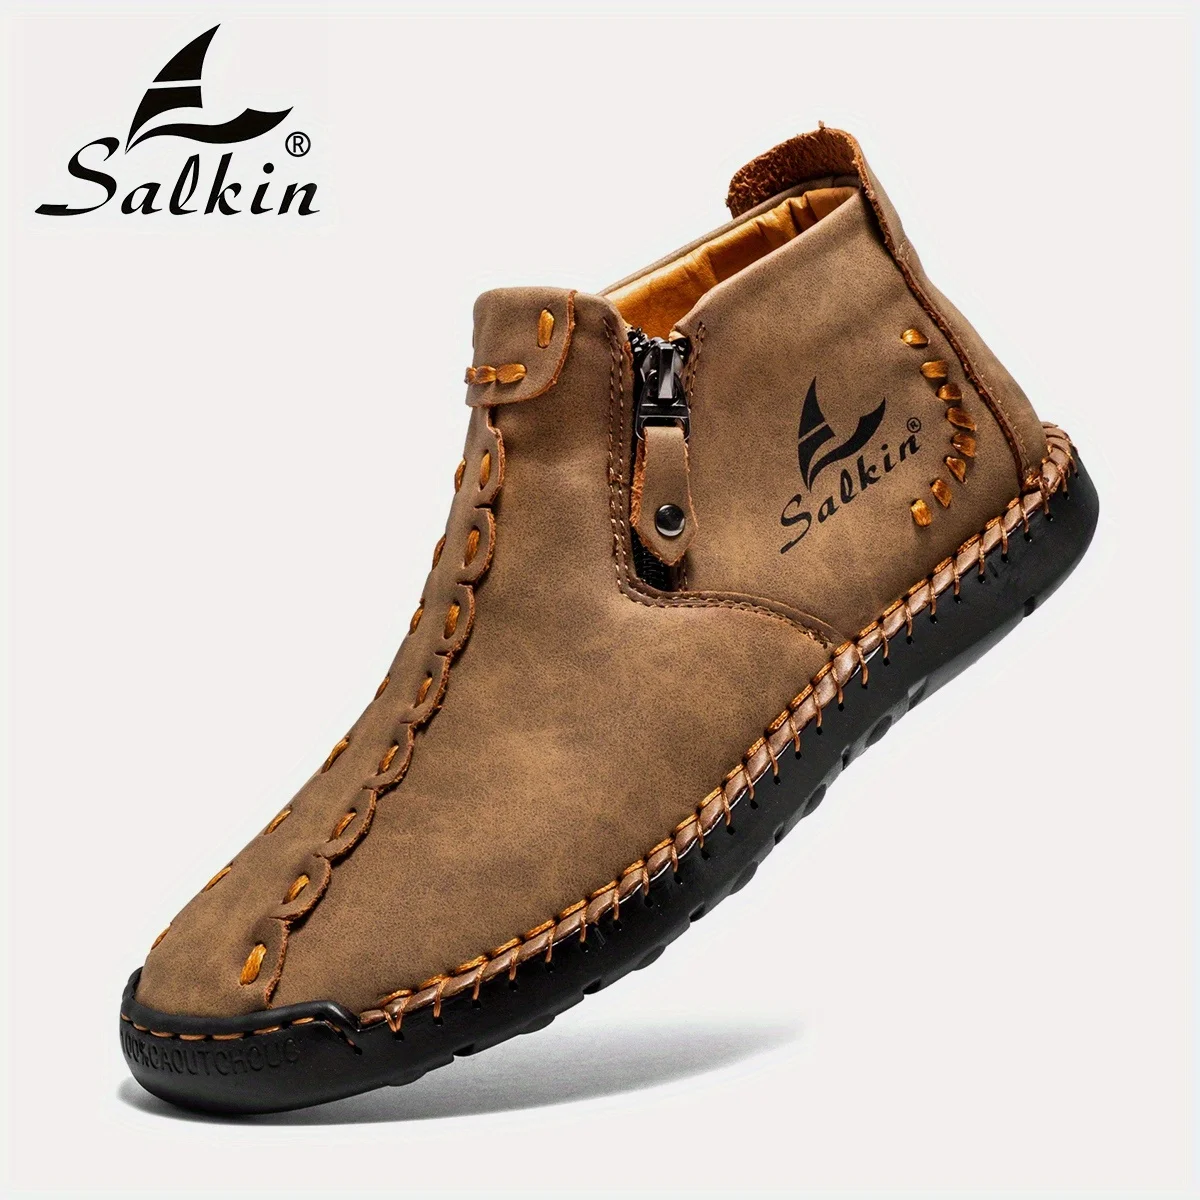 

Mens Vintage Ankle Boots With Side Zippers, Wear-resistant Anti-skid Boots With PU Leather Uppers For Outdoor,